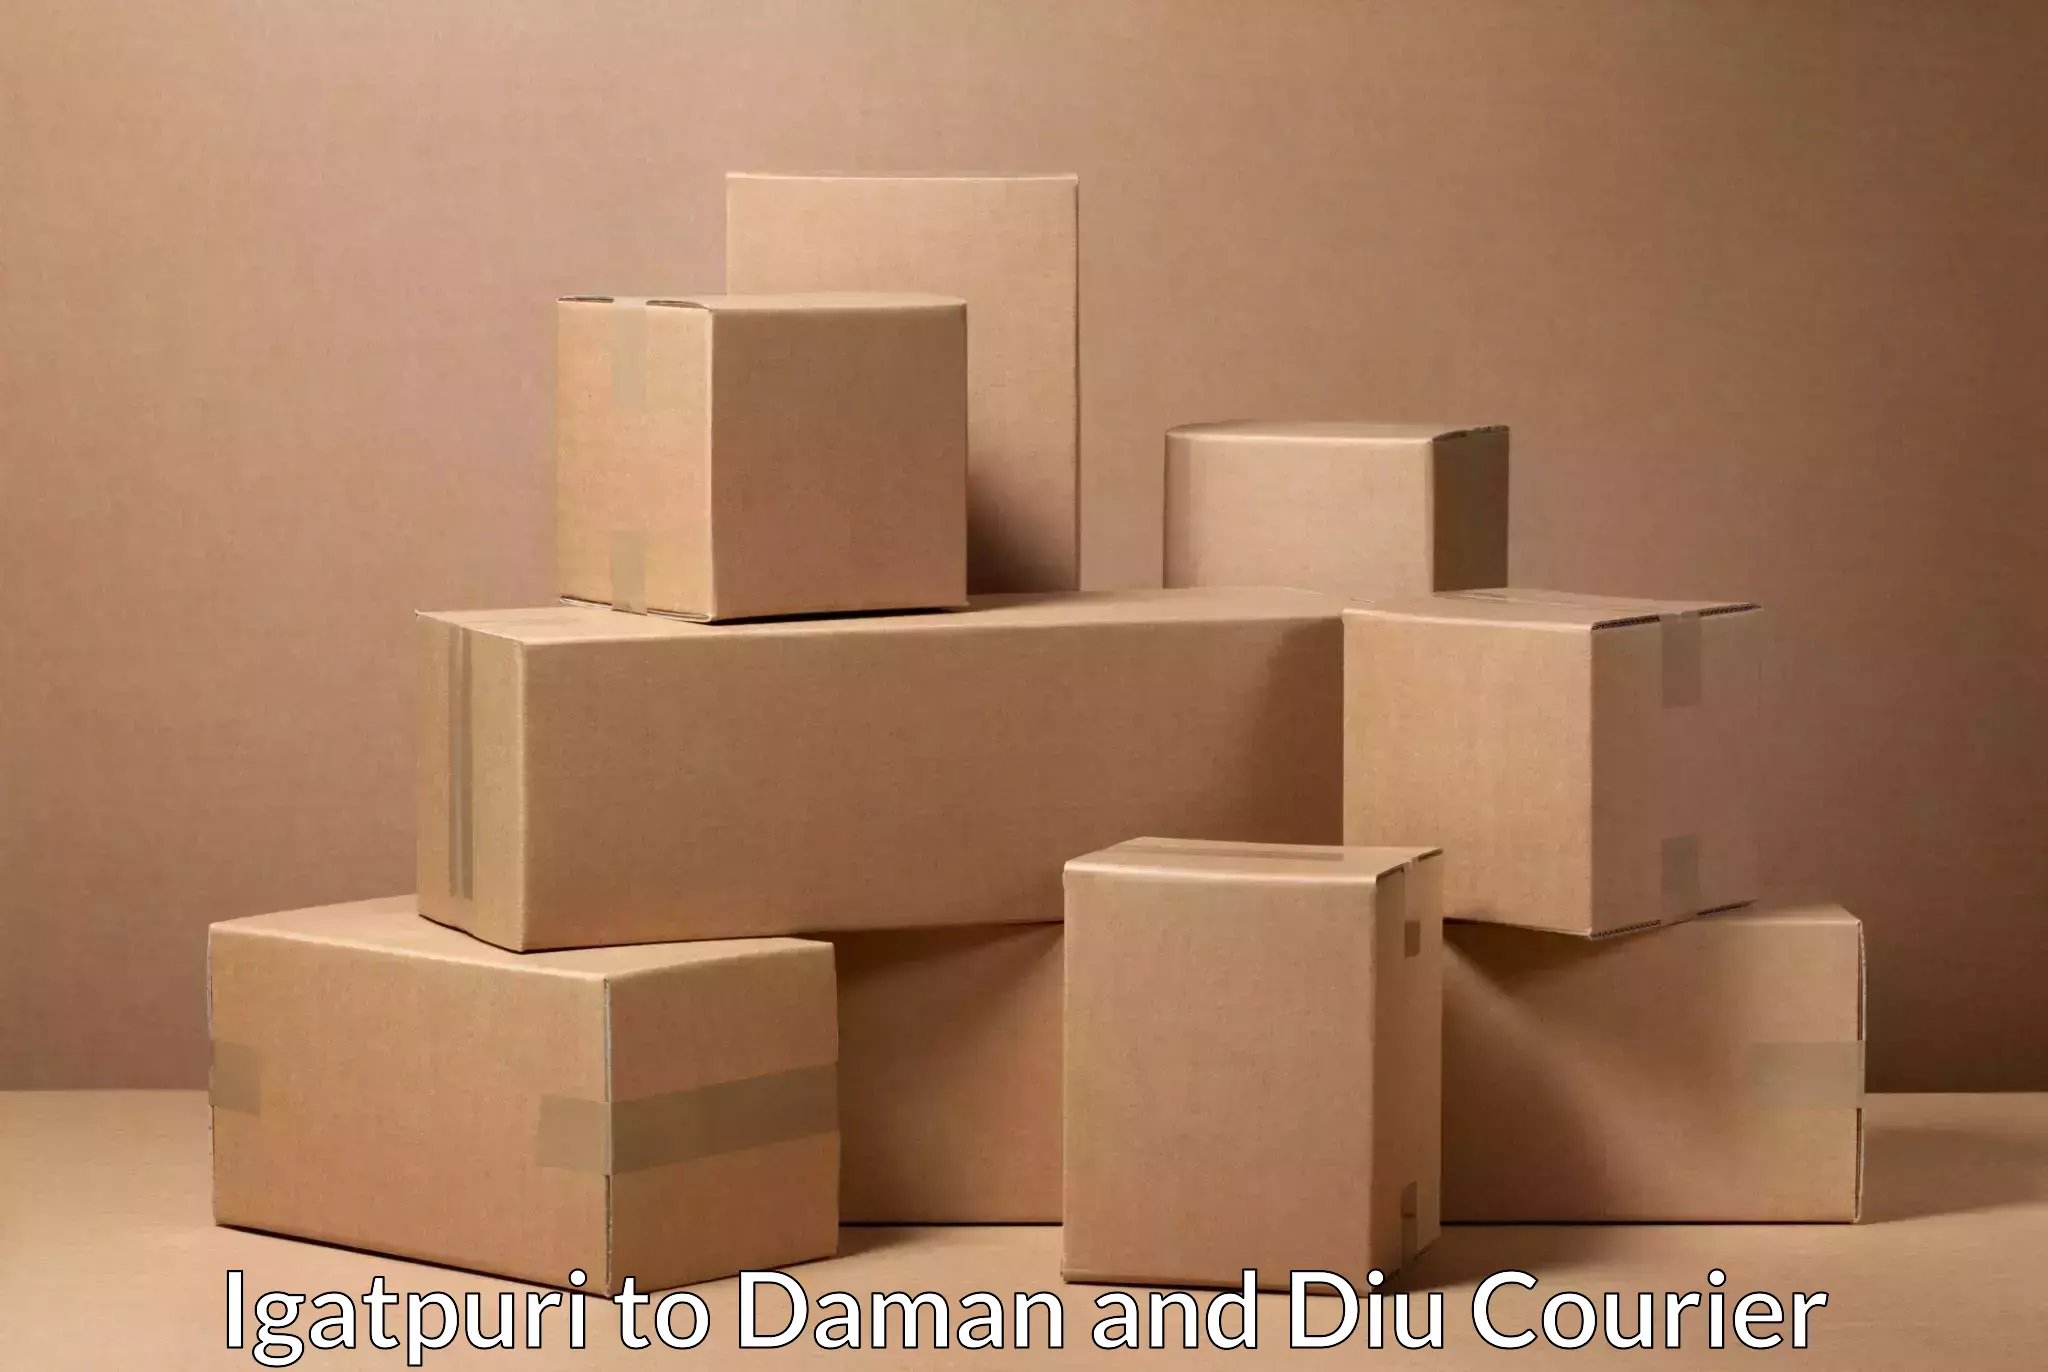 Flexible parcel services Igatpuri to Daman and Diu